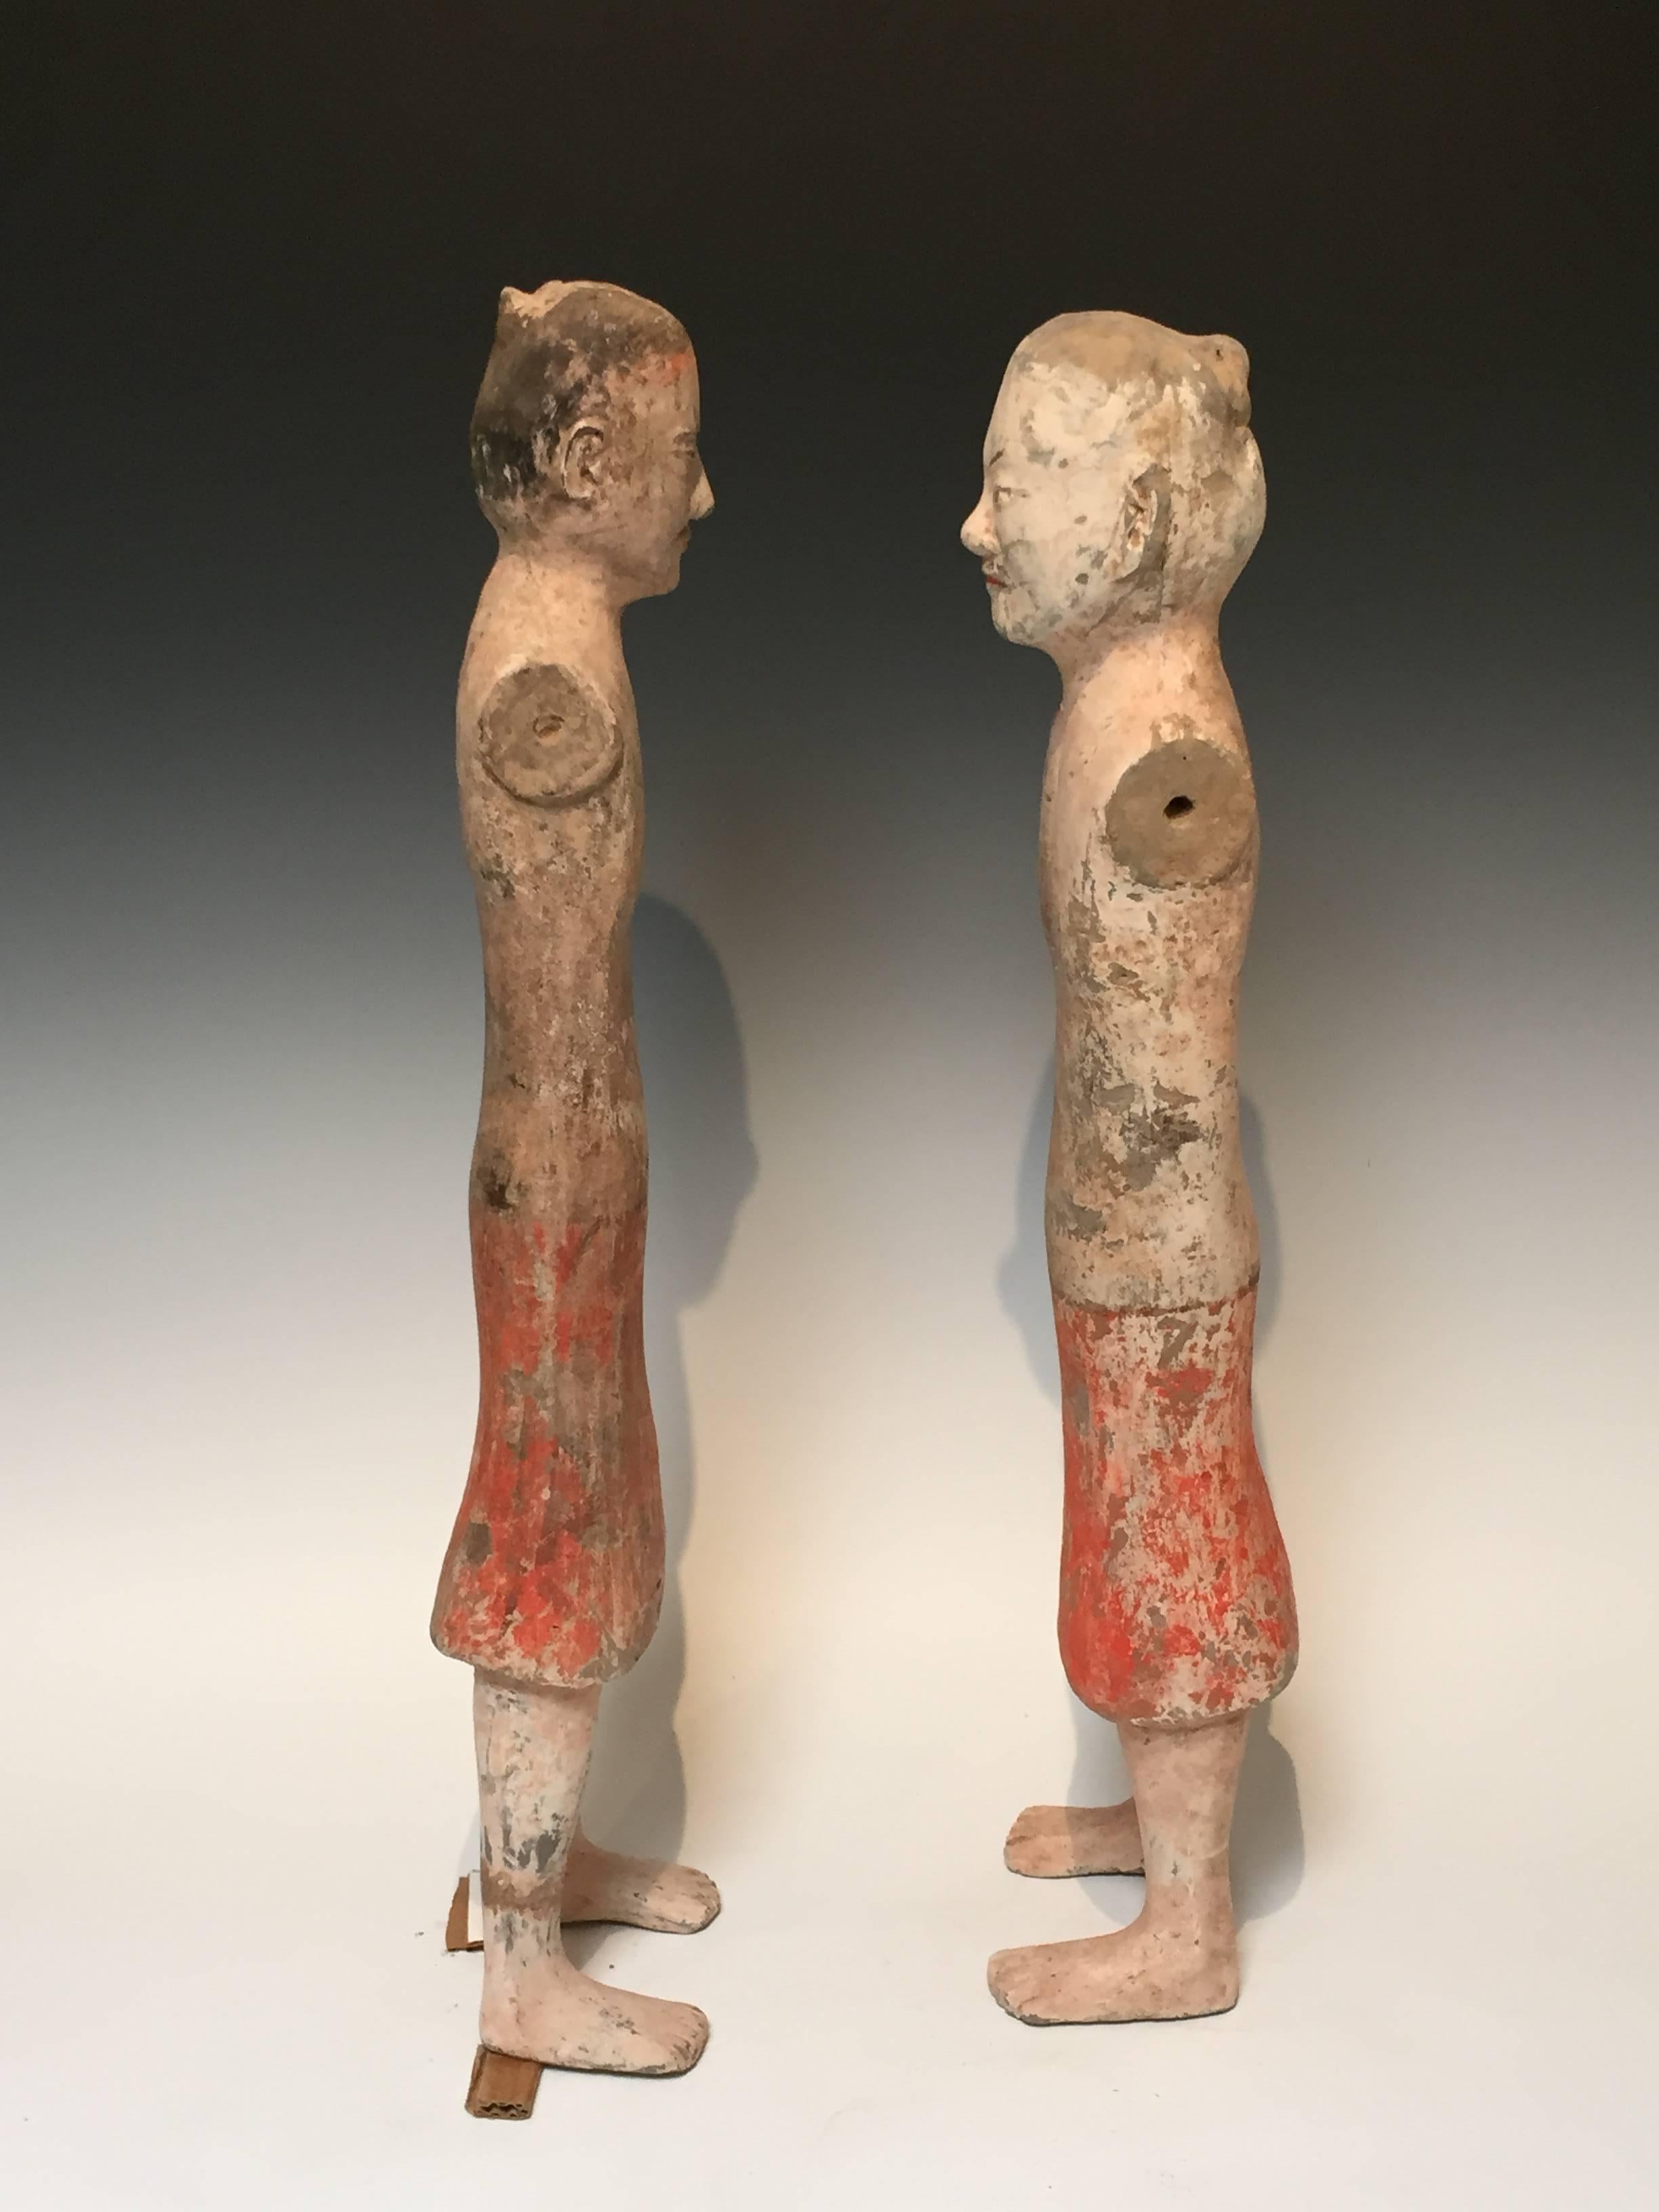 A pair of painted Han Dynasty pottery figures of male attendants.
Arms lost to age and deterioration. All original pigments.
Measures: 25" tall.